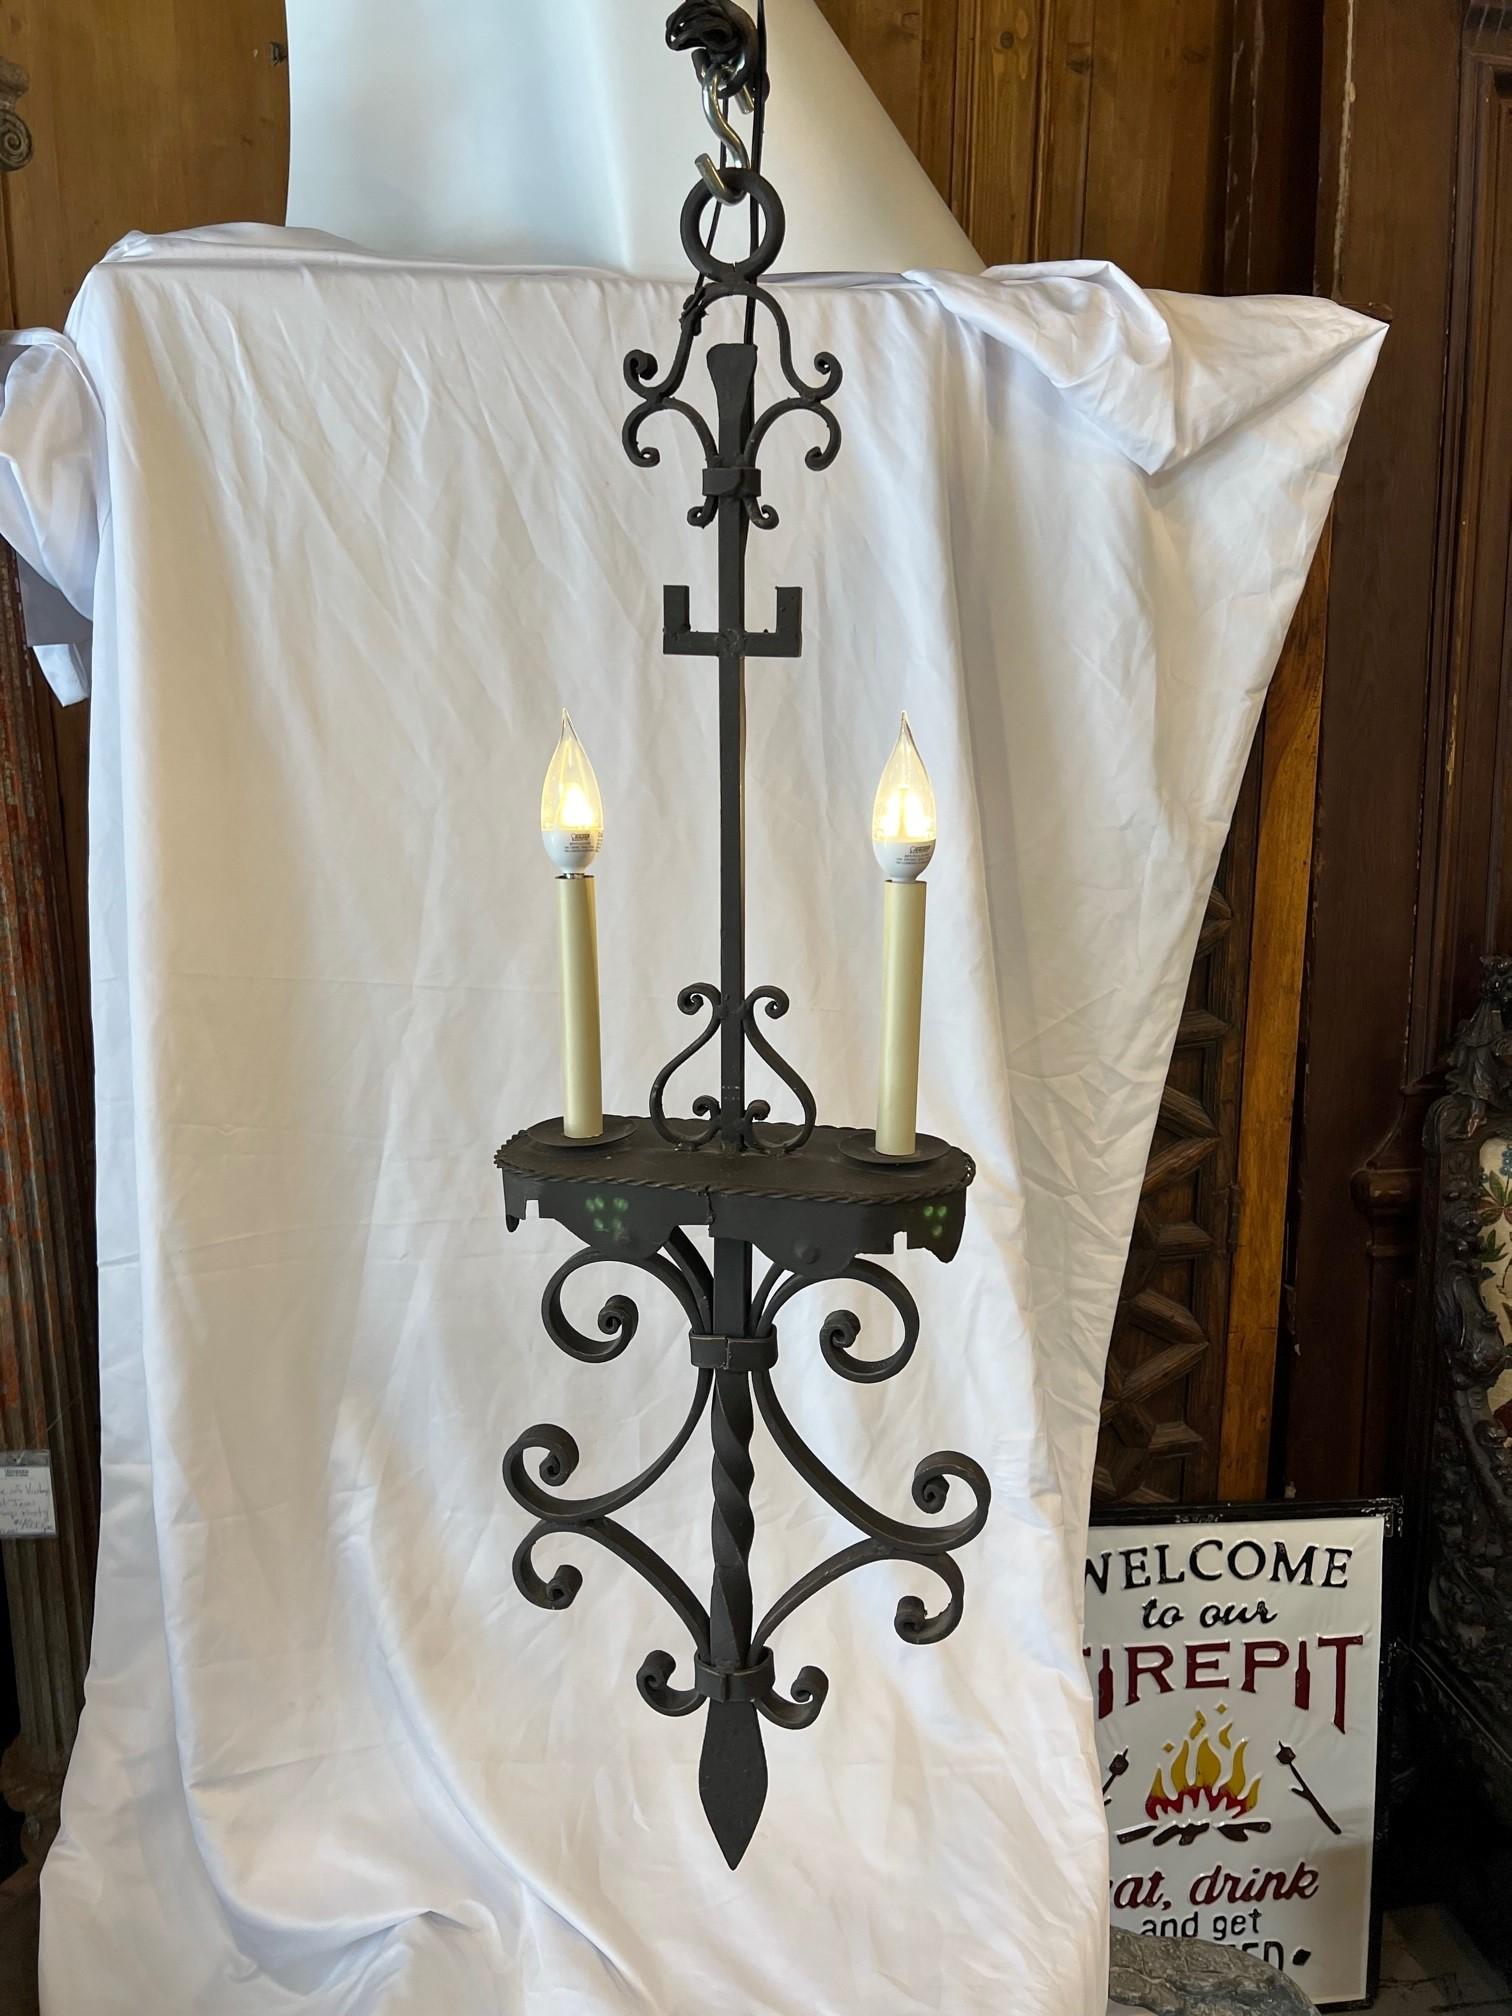 Hand forged wrought iron pendant light with iron scroll work and hand hammered grooved twist center with two lights. This is a nice handed forged light which would look great above a kitchen island or small table. I have three available they are